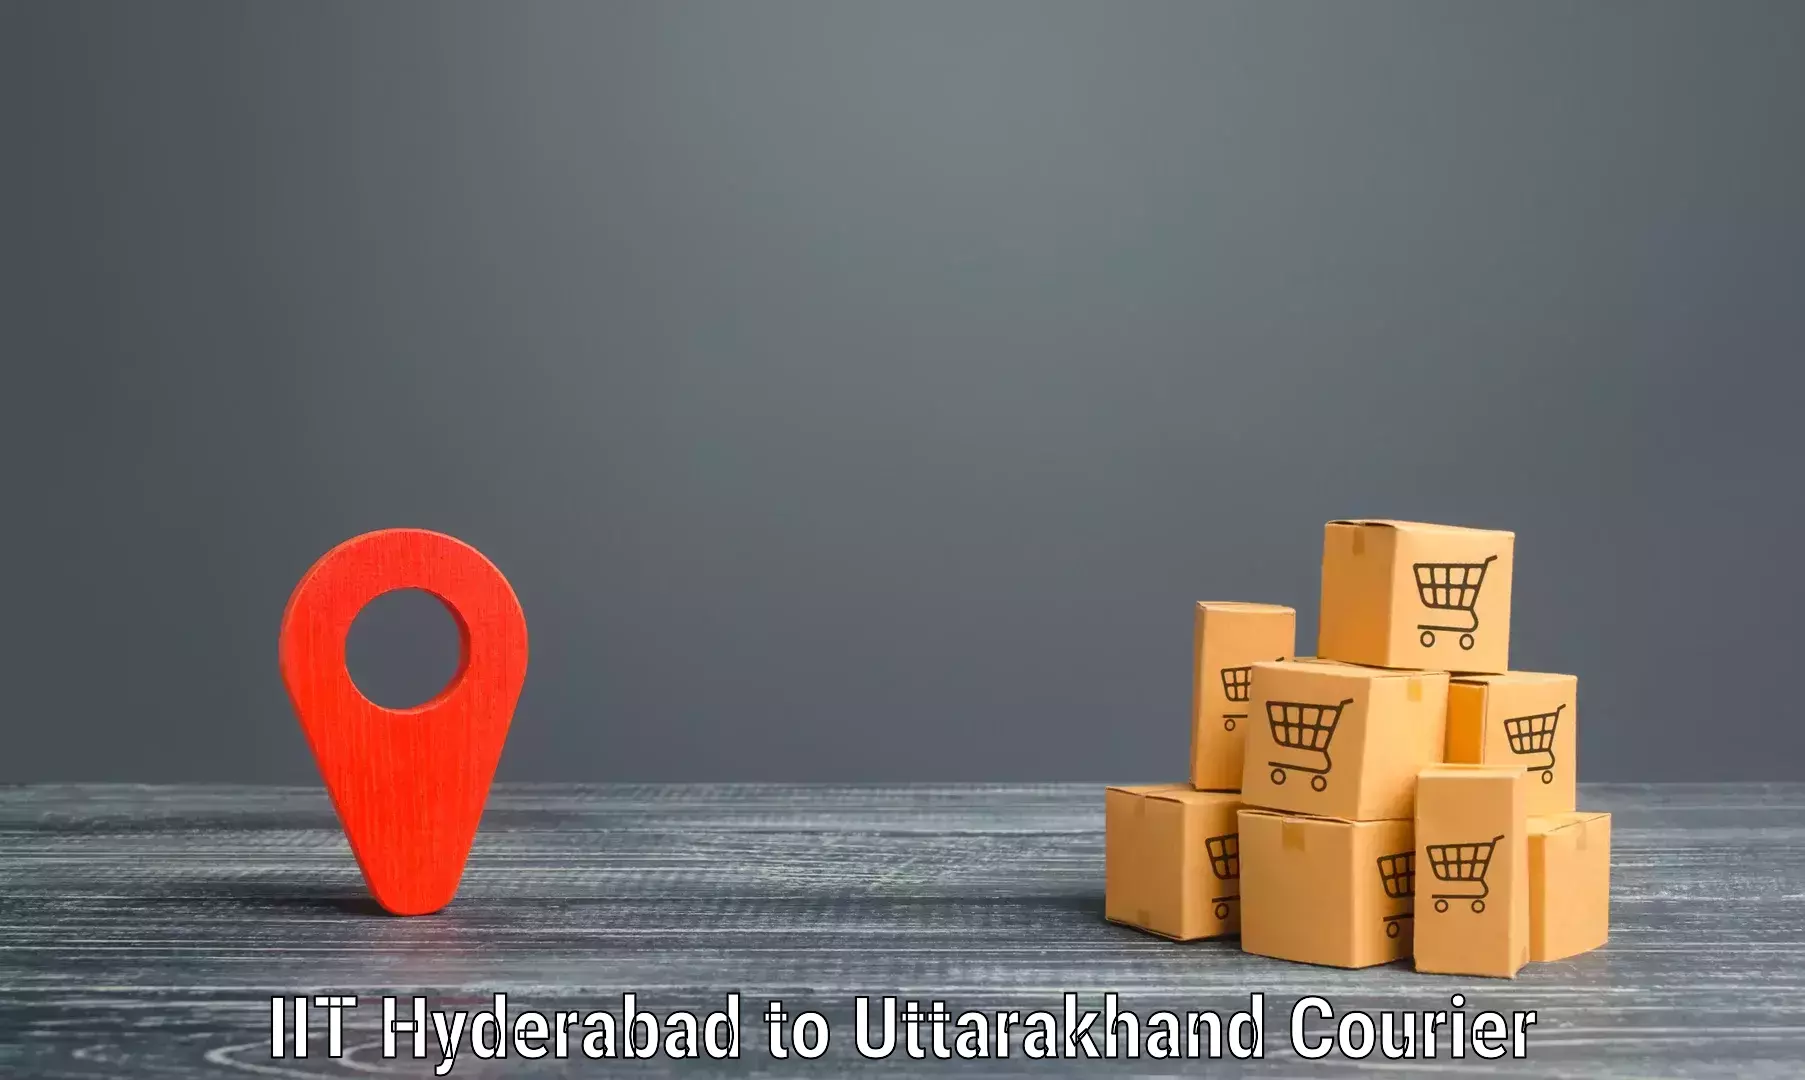 Cash on delivery service IIT Hyderabad to Someshwar